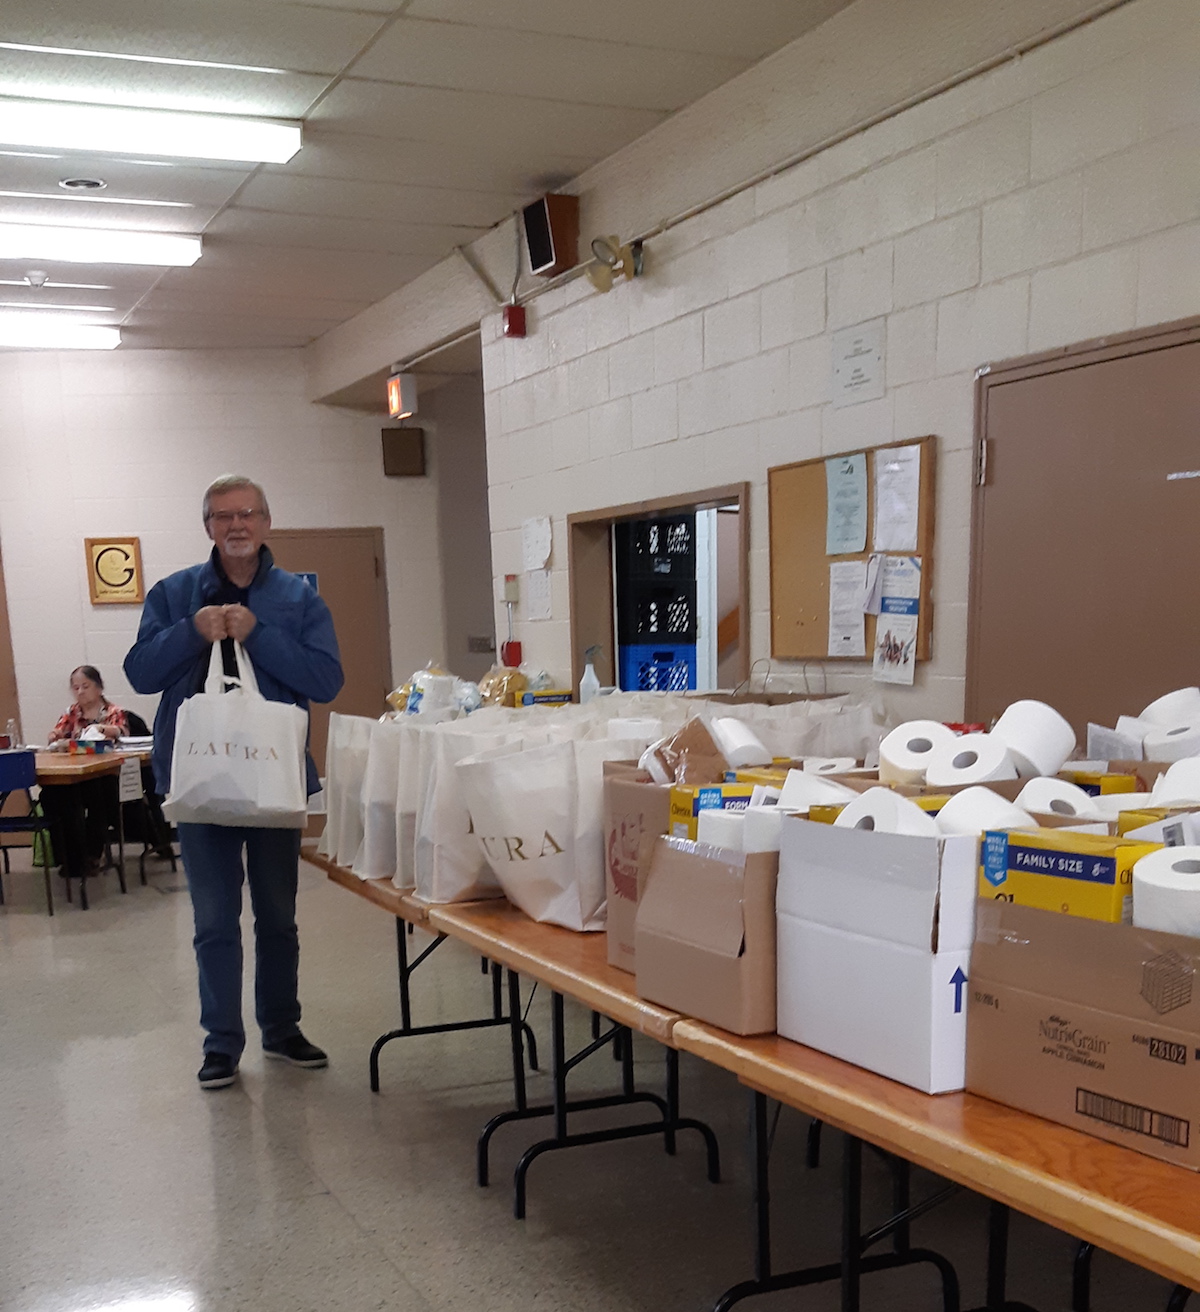 A man with a collection of donated food and reusable shopping bags at a food bank.